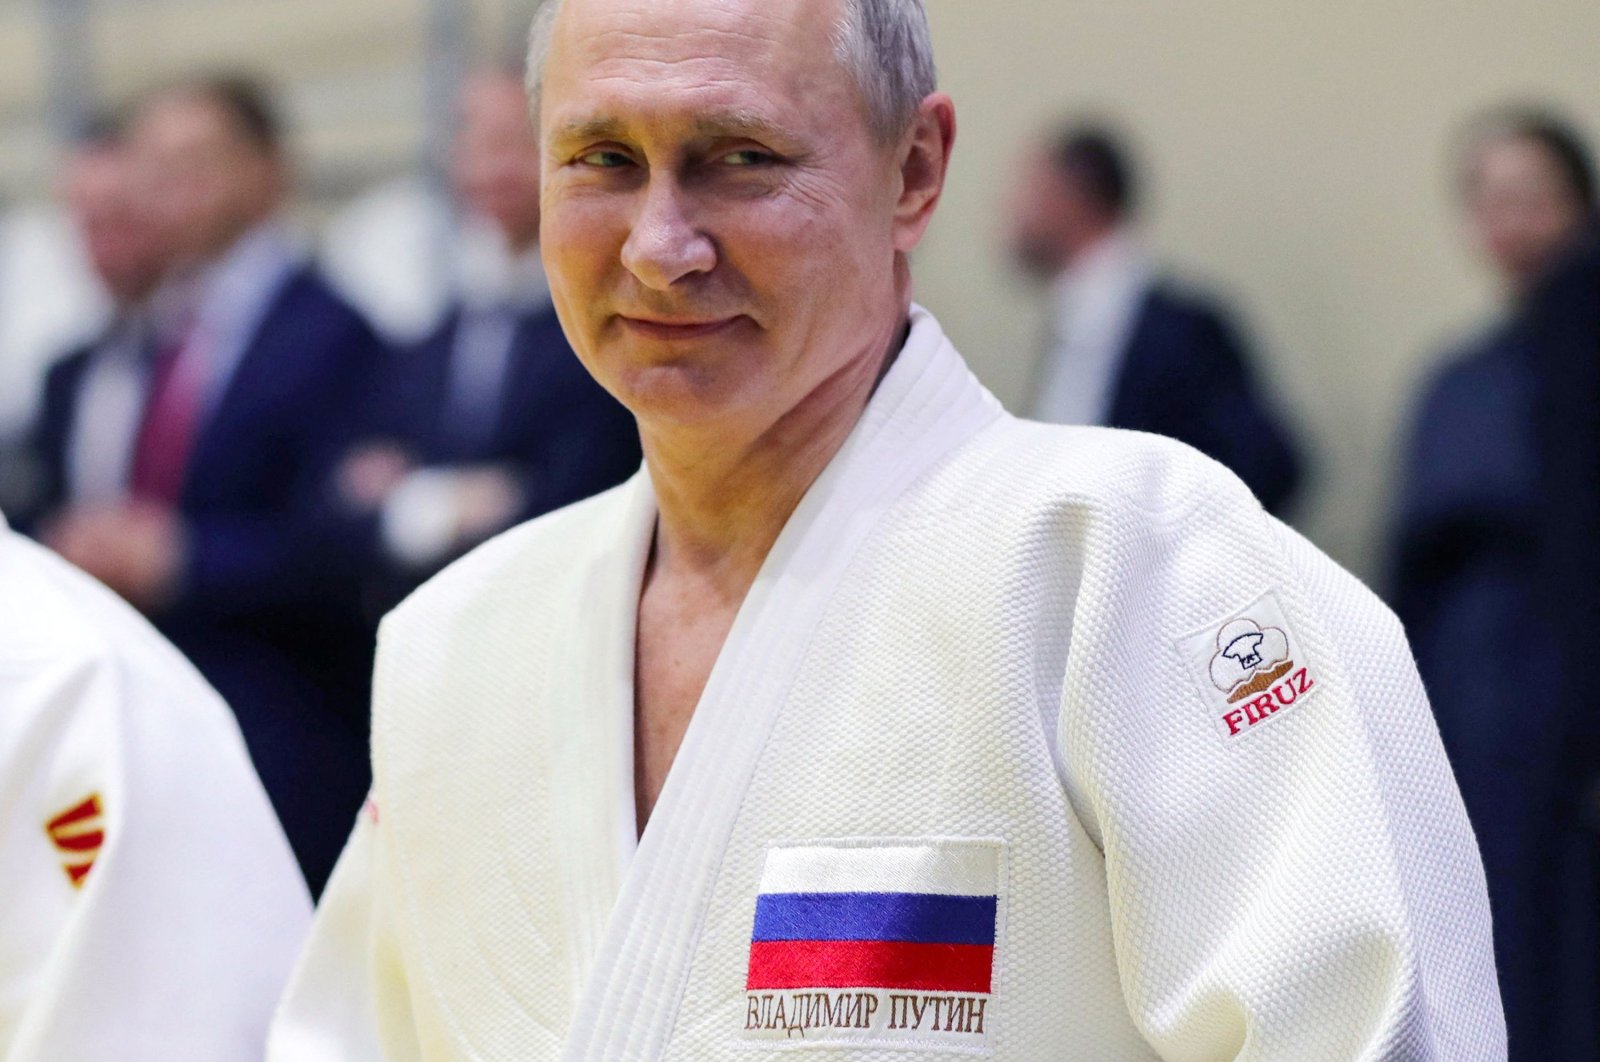 Russian President Vladimir Putin during a training session with members of the Russian national judo team in Sochi, Russia, Feb. 14, 2019. (AFP Photo)